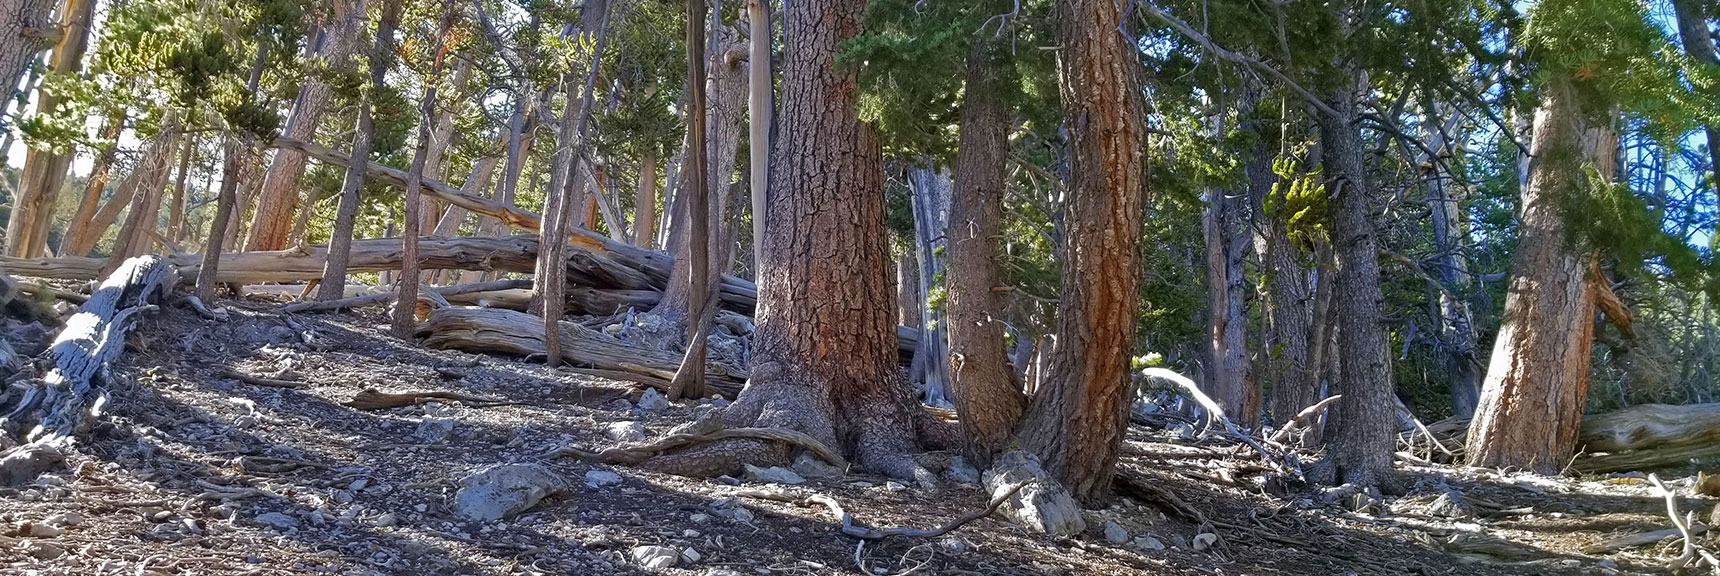 Many Fallen Trees on Ridge. Harsh Winters? Radically Steep Slopes? | Lee to Kyle Canyon | Foxtail Approach | Mt Charleston Wilderness | Spring Mountains, Nevada